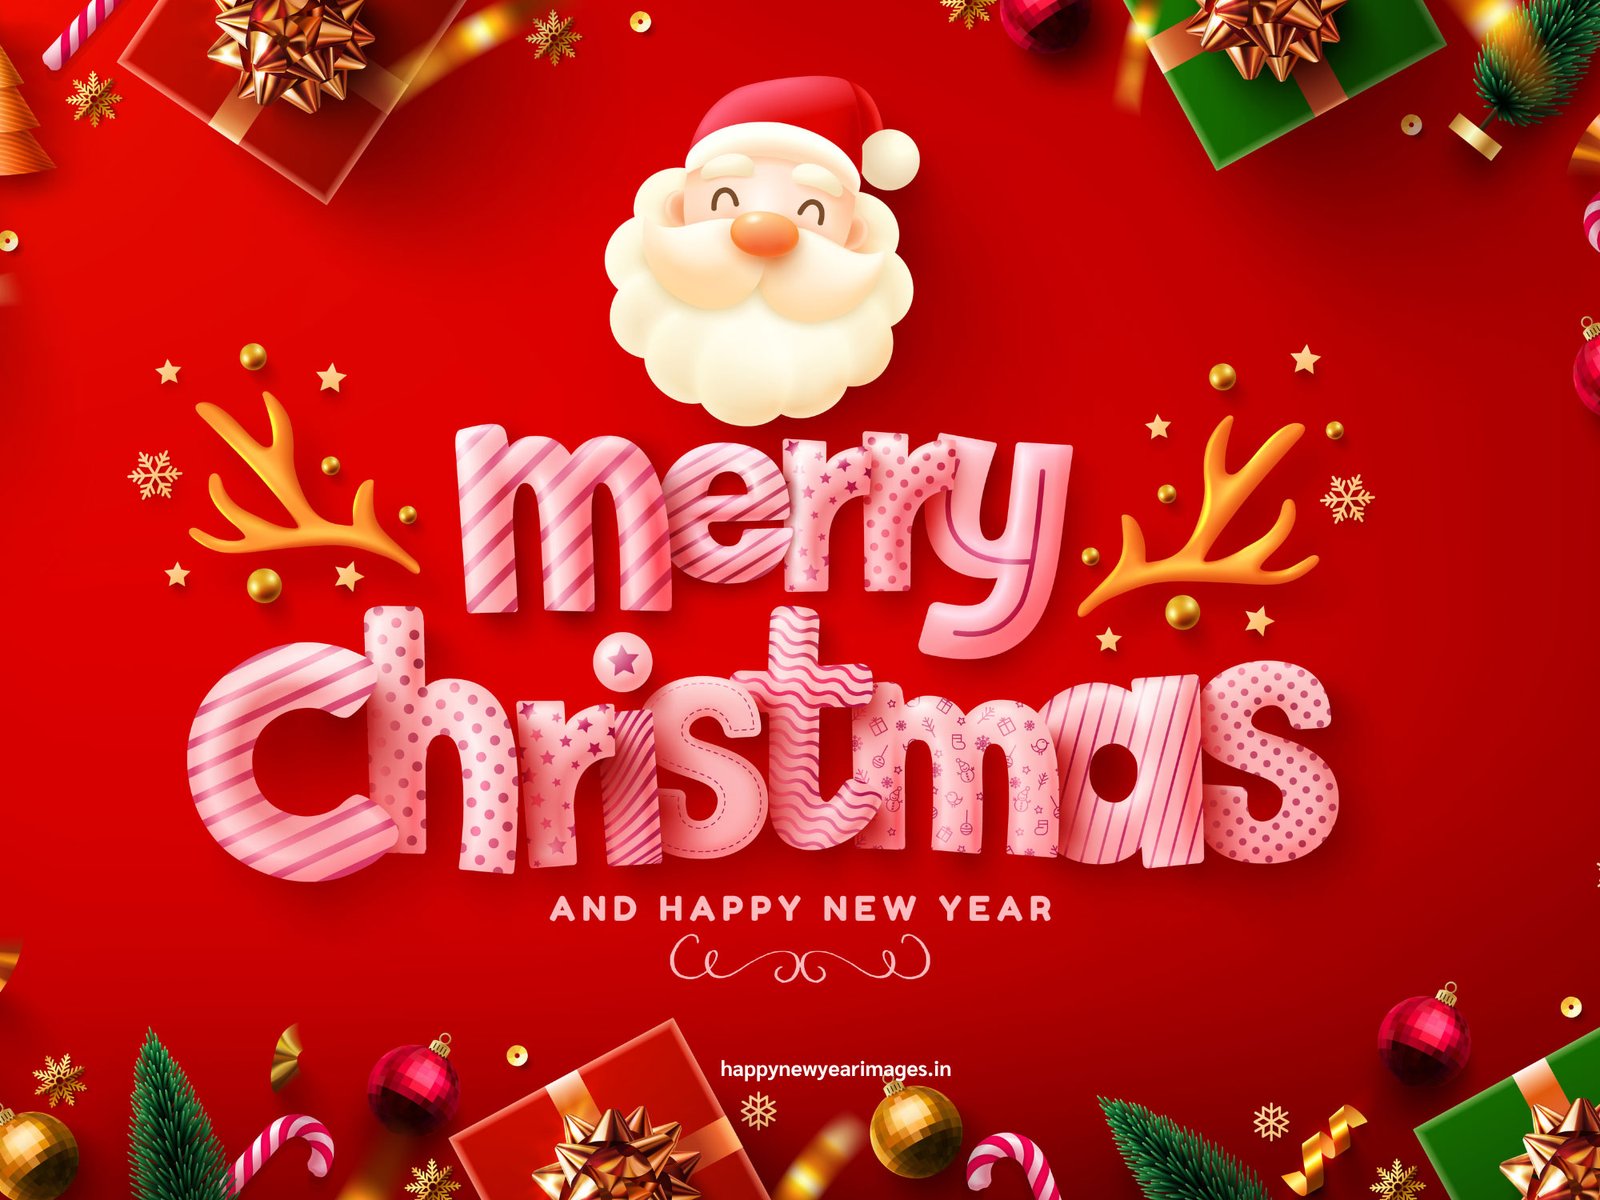 merry christmas wishe images